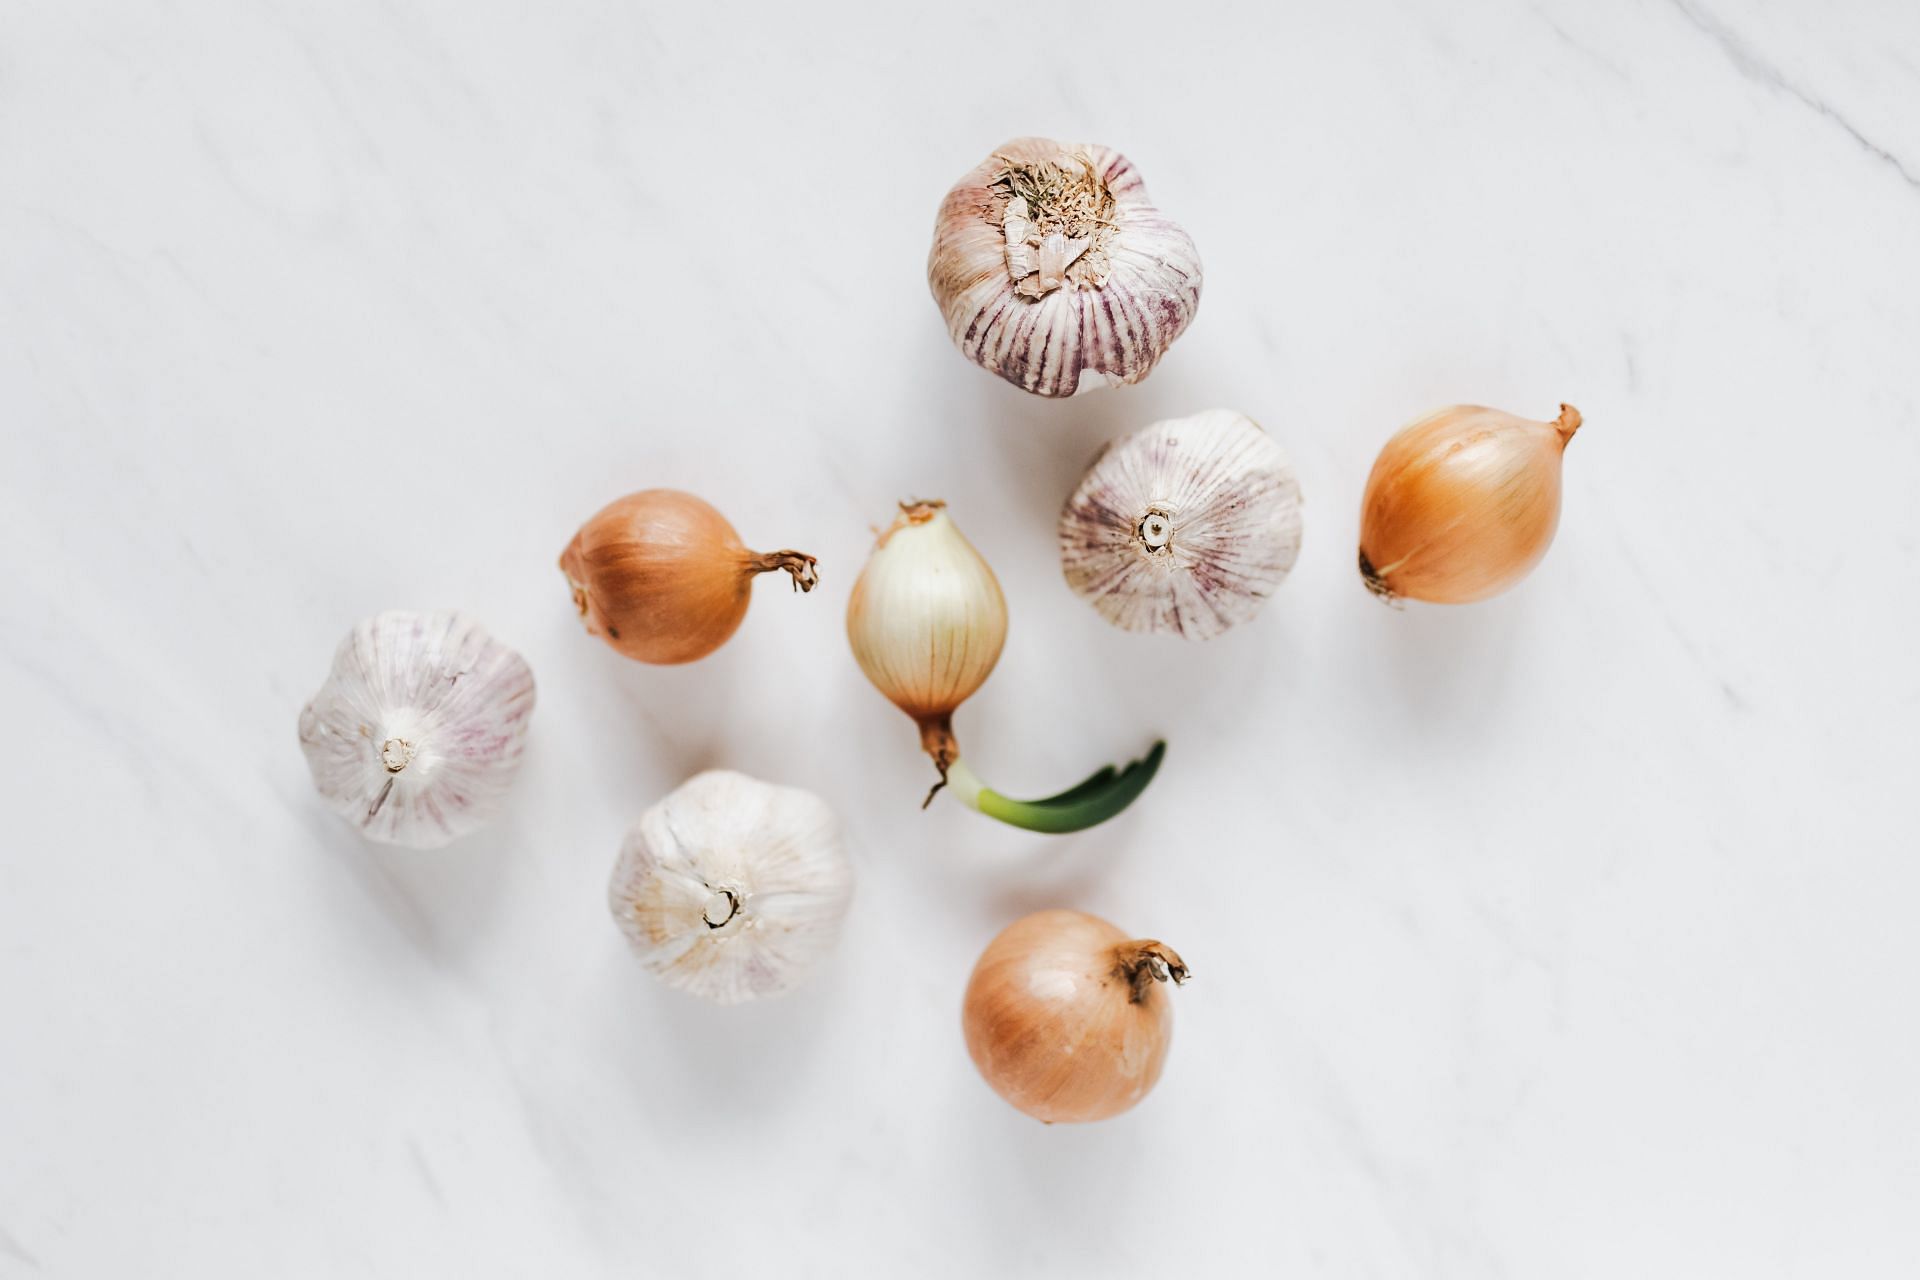 Pungent smelling foods from the onion and garlic family are halitosis-causing foods (Image via Pexels @Karolina Grabowska)